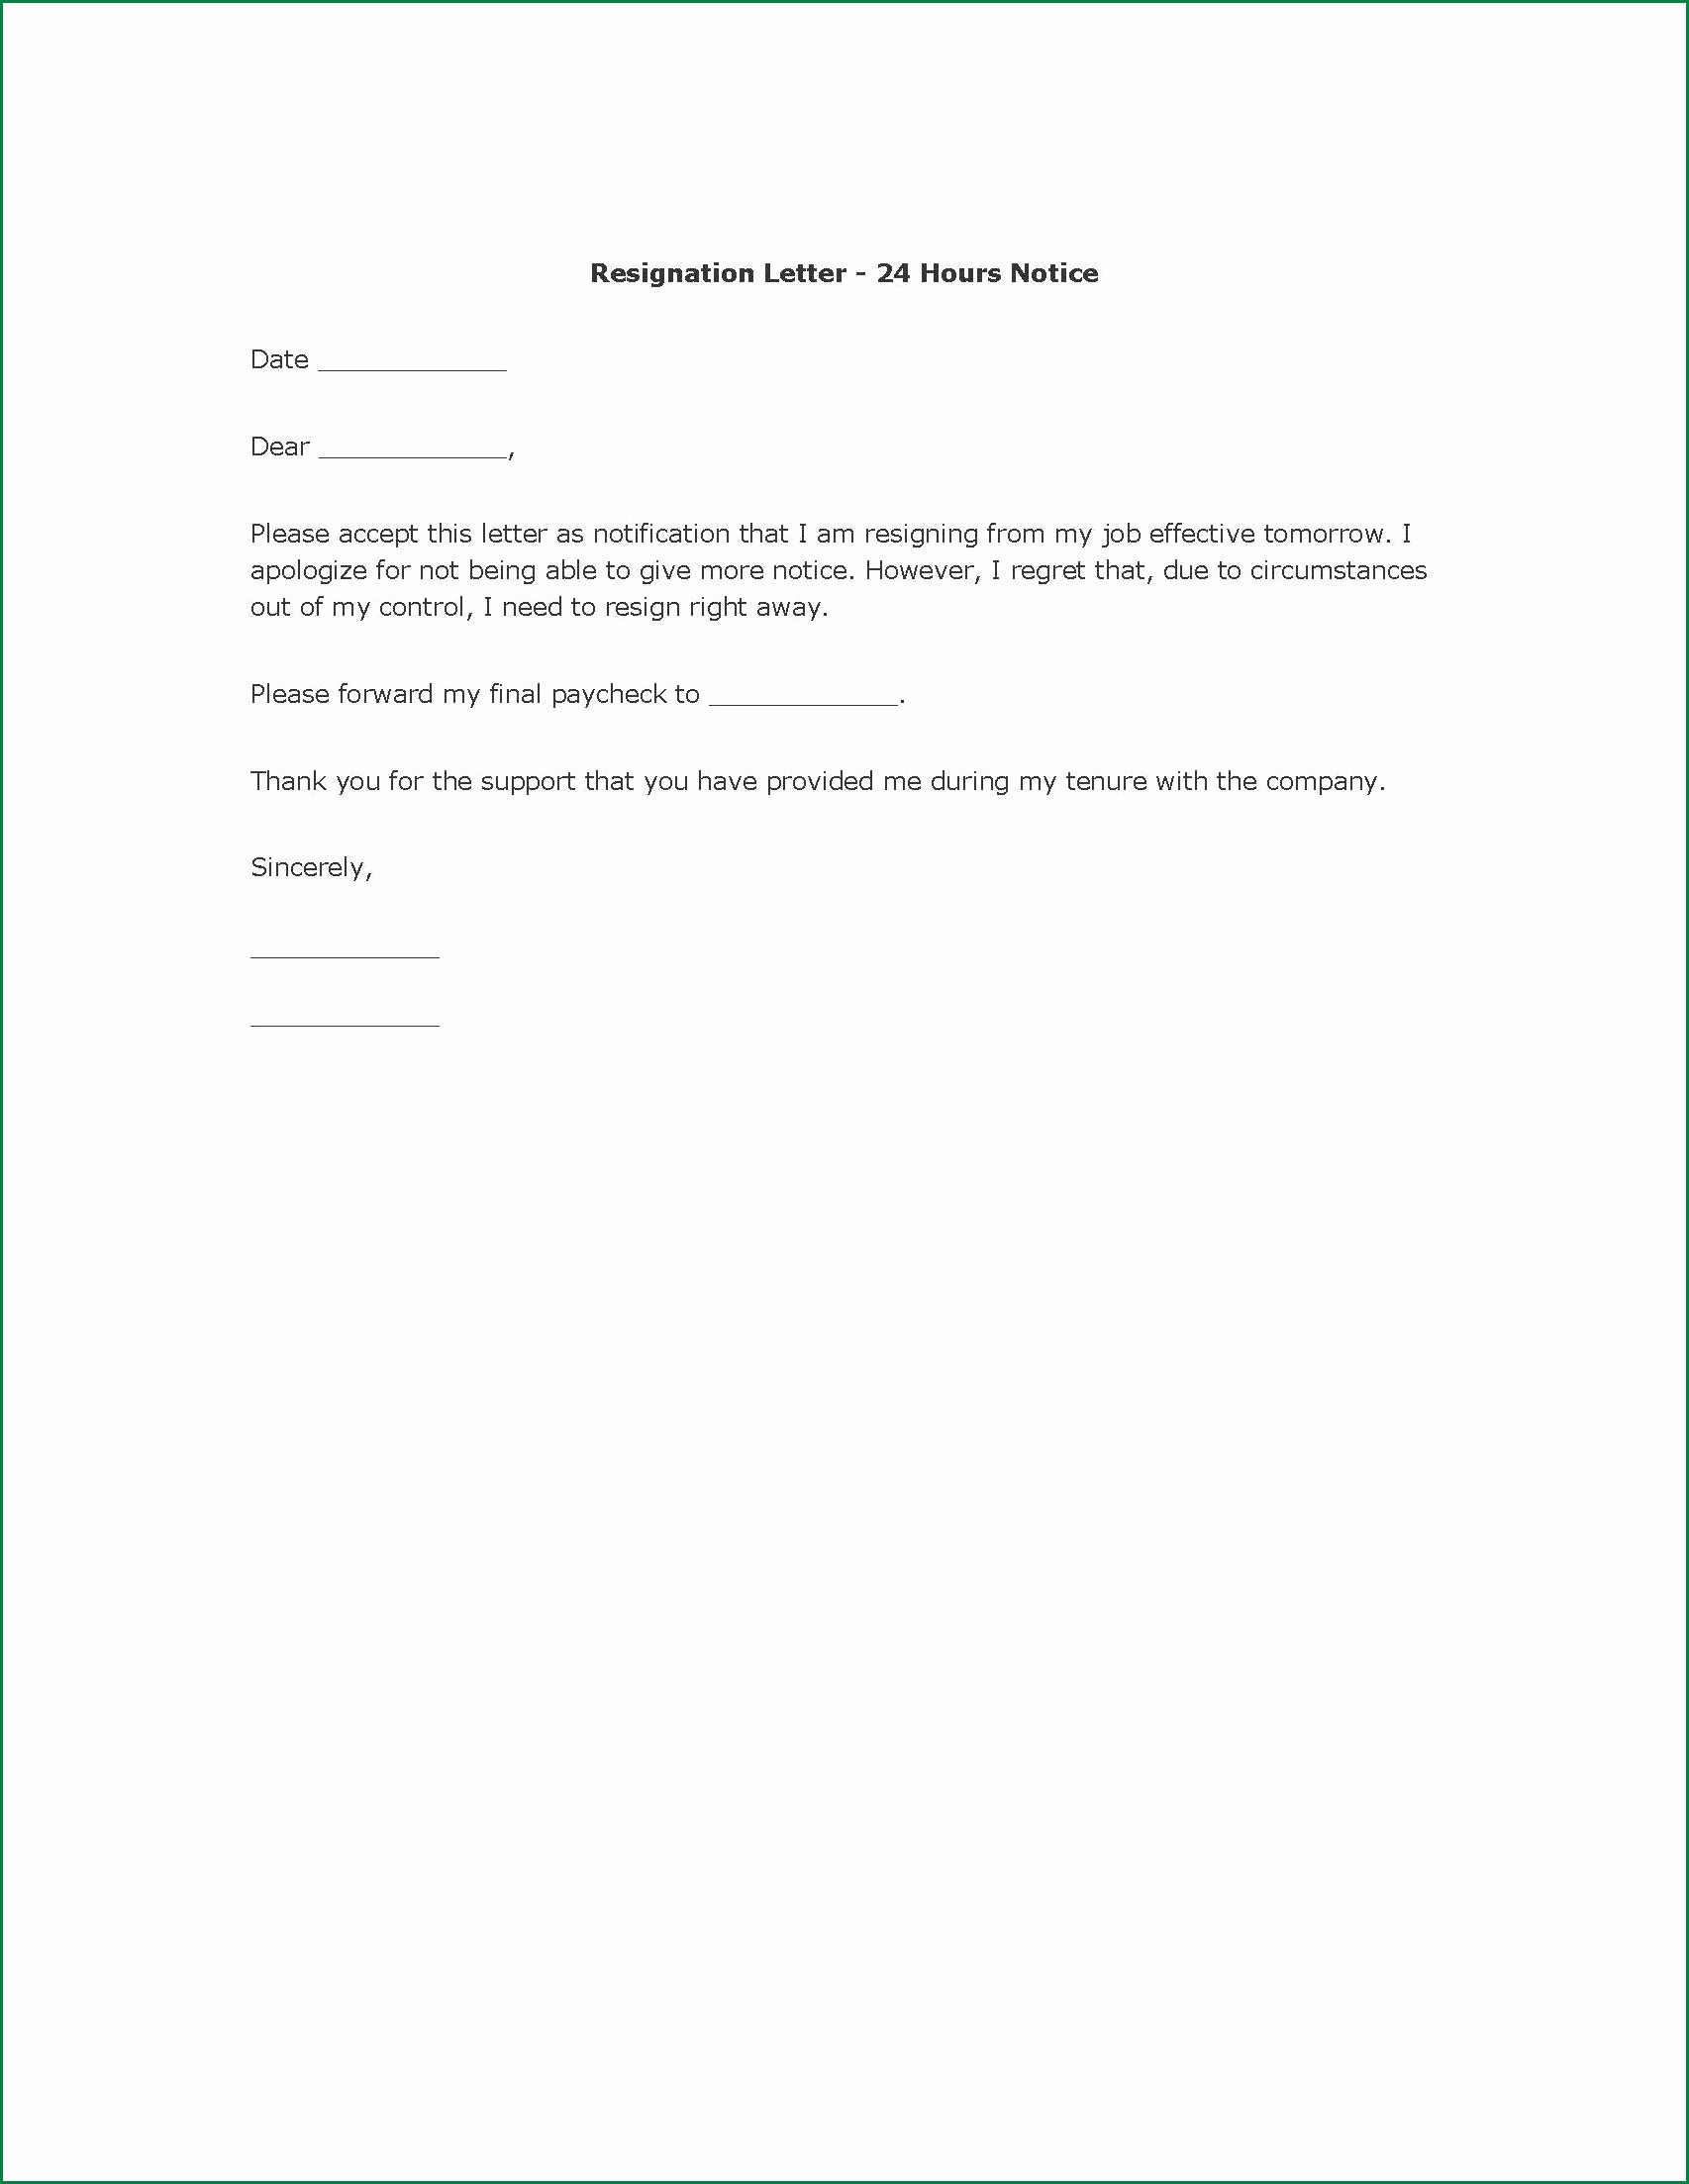 Letter Of Resignation Template Microsoft Awesome Sample Resignation Letter 24 Hrs Notice